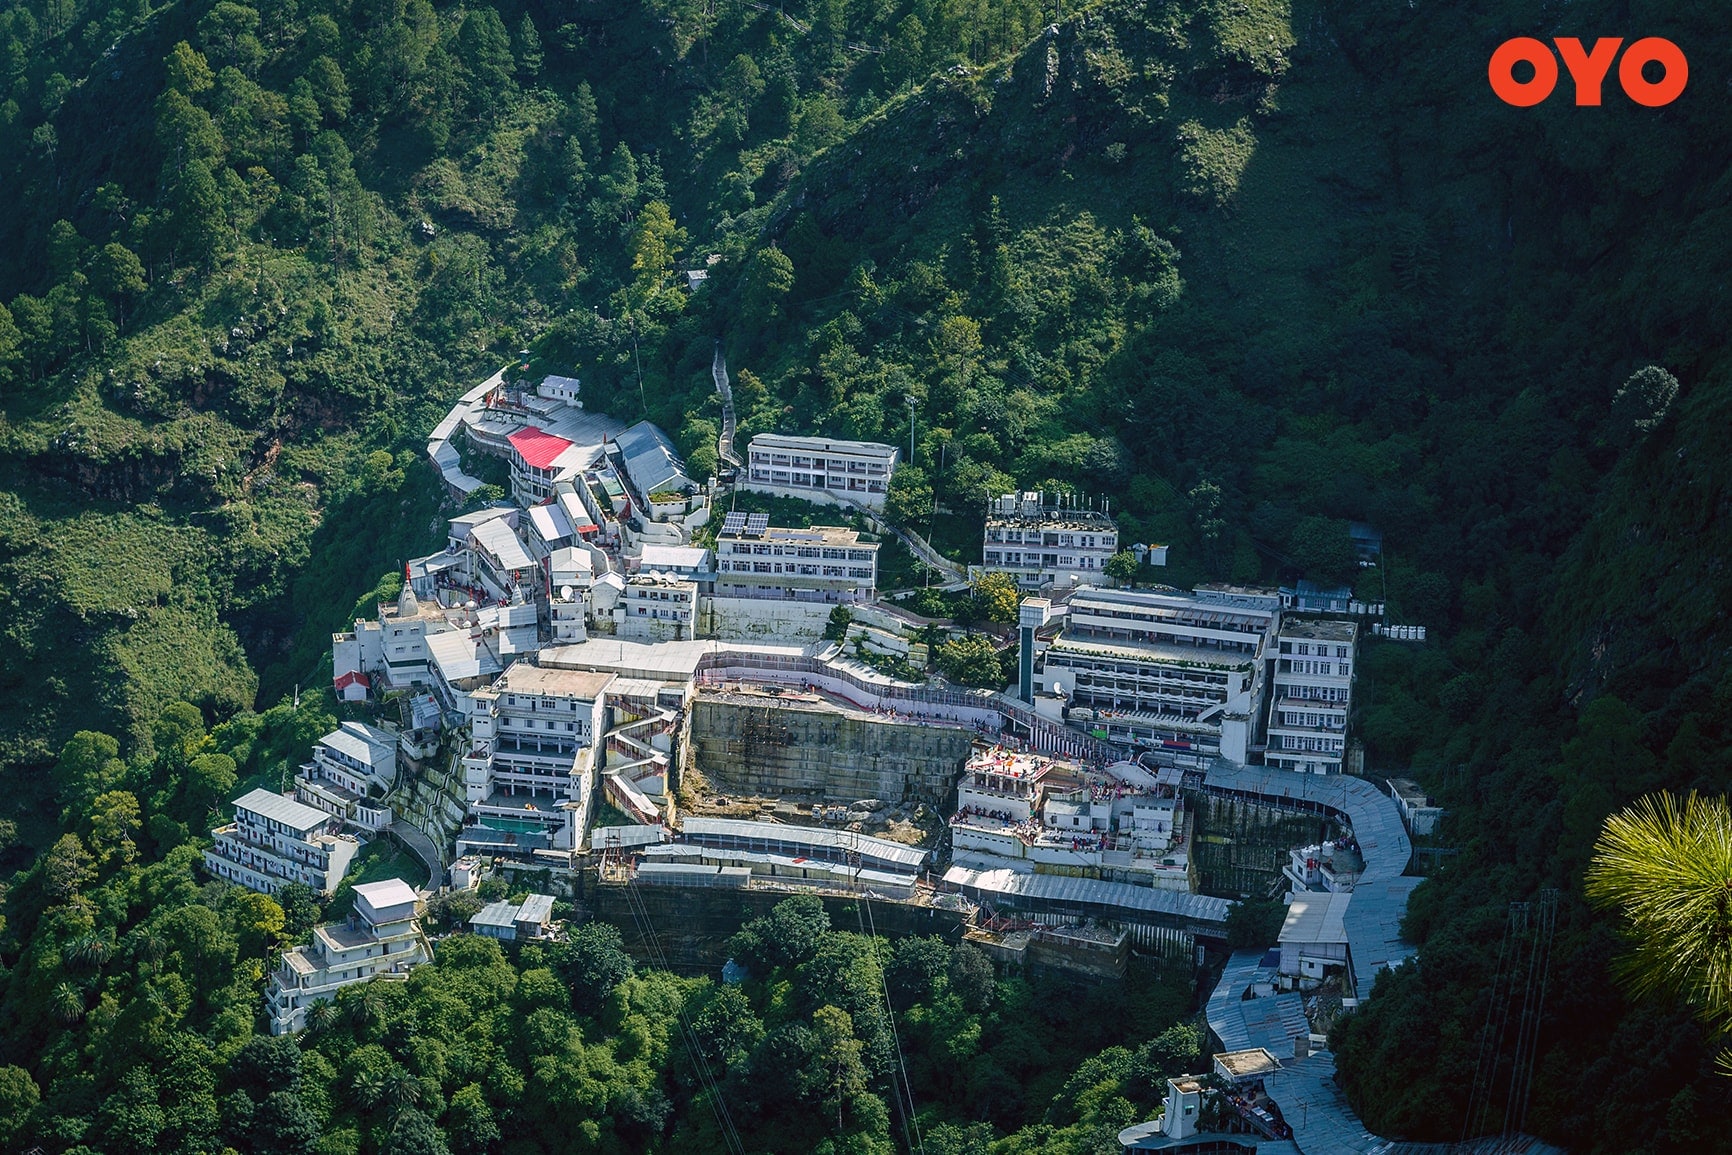 Vaishno Devi Temple, Jammu Kashmir- One of the most famous temple of India